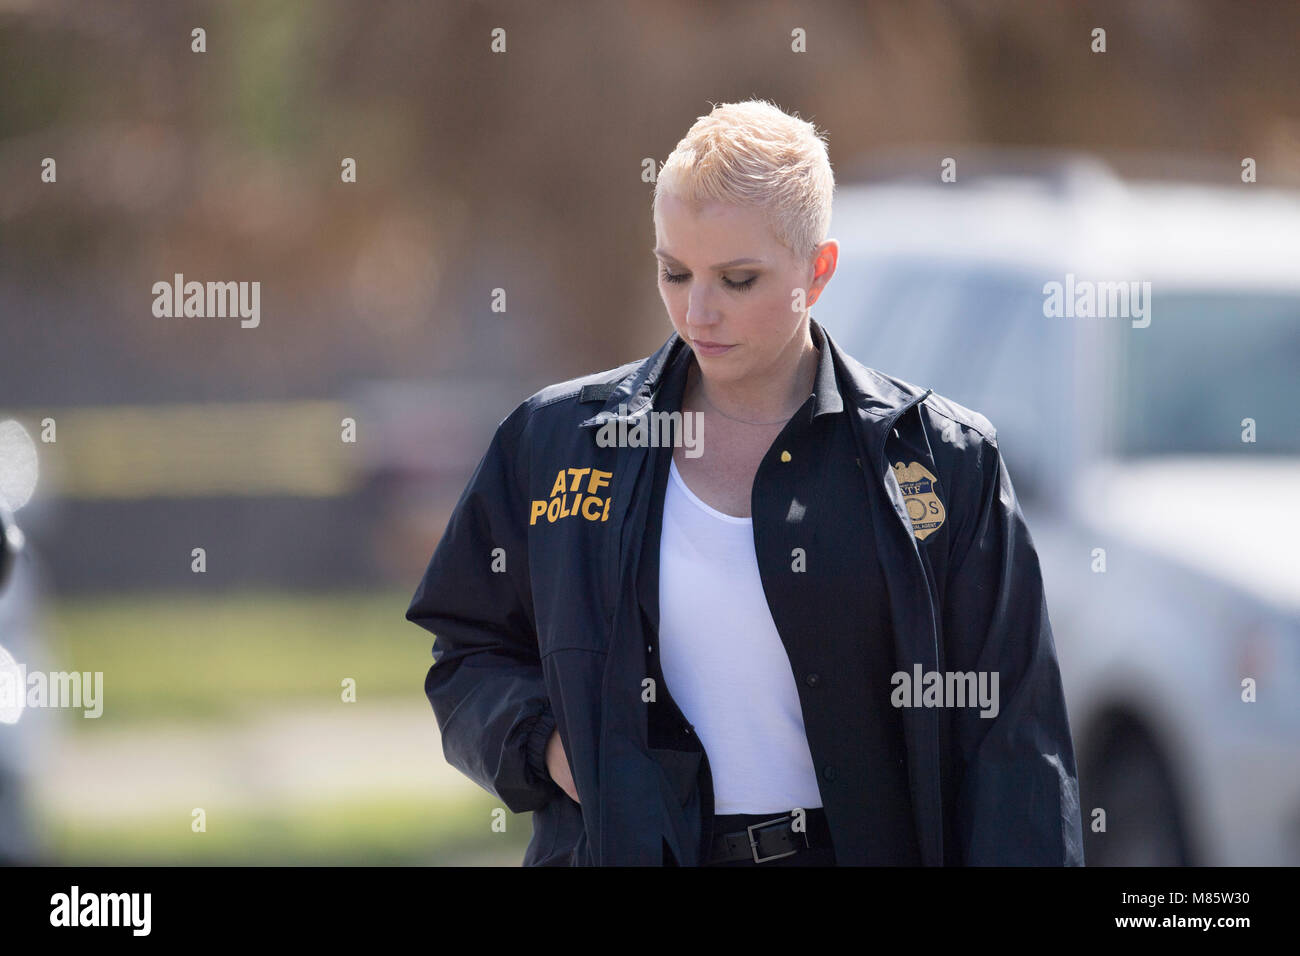 Austin, Texas March 14, 2018: A female ATF agent on the scene of an active investigation of a package bombing that critically injured an elderly woman in east Austin. Two were killed earlier by package bombs left by an unknown assailant. Credit: Bob Daemmrich/Alamy Live News Stock Photo